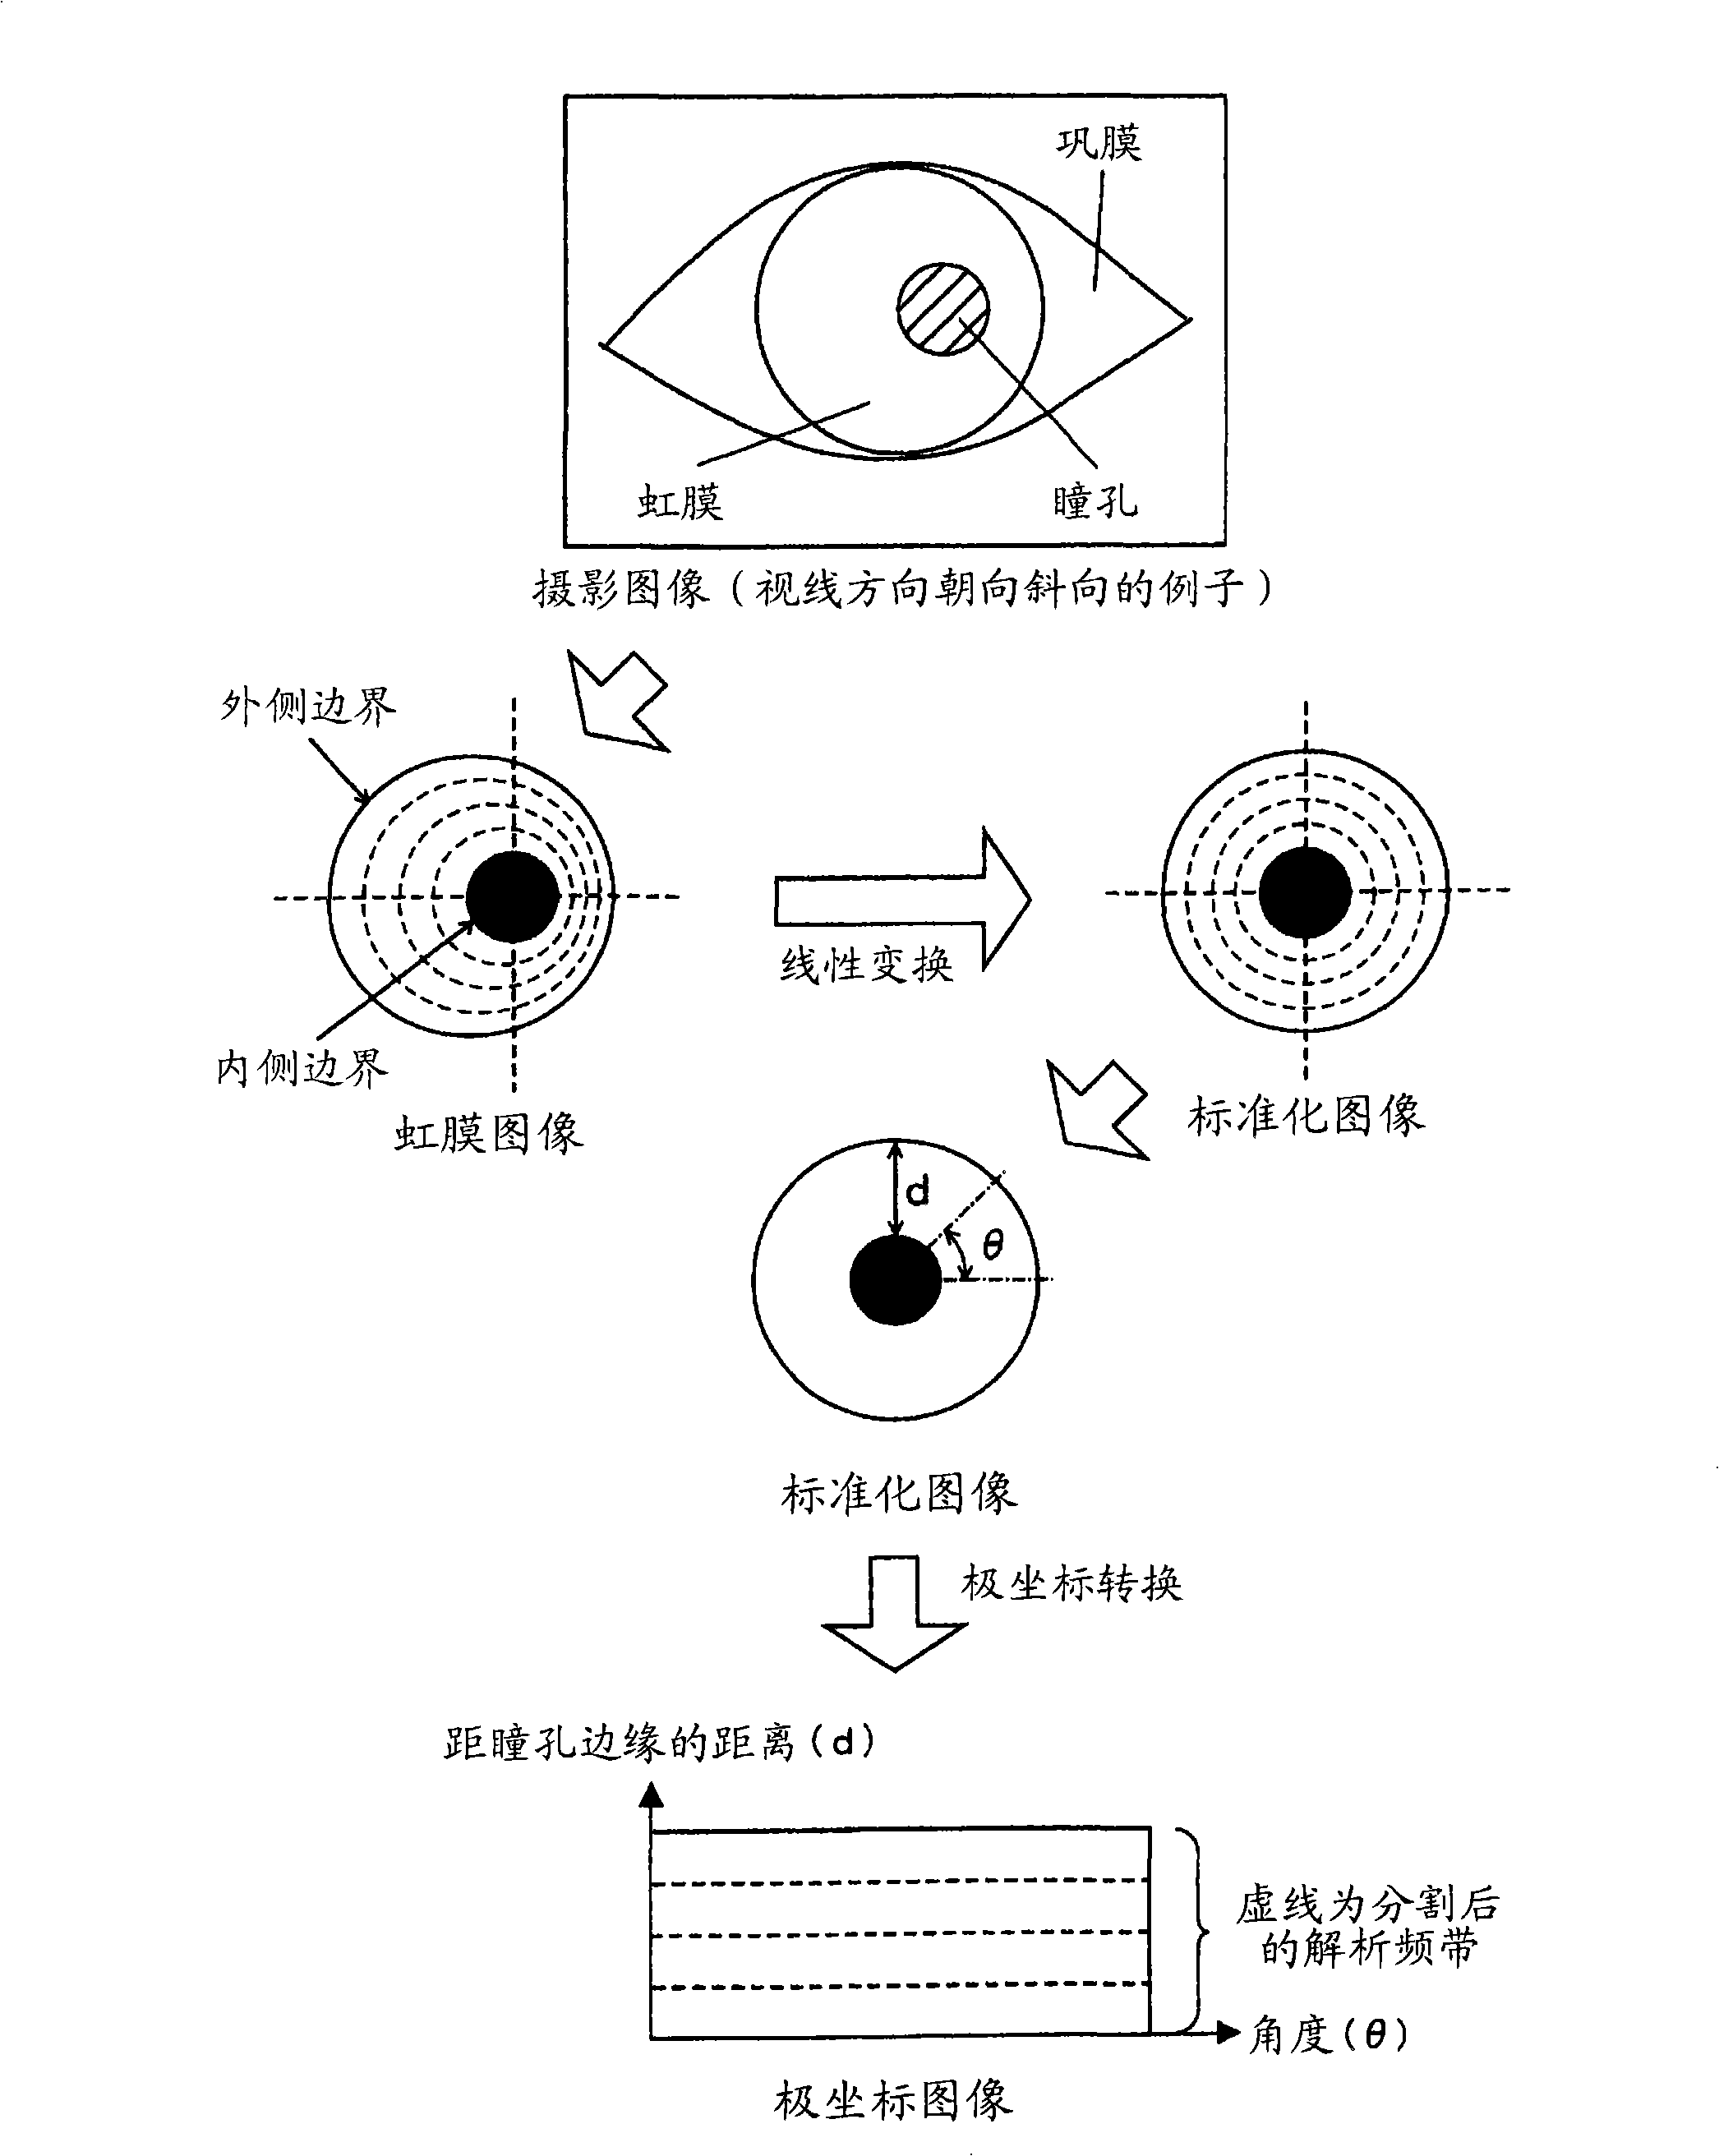 Personal authentication system and personal authentication method